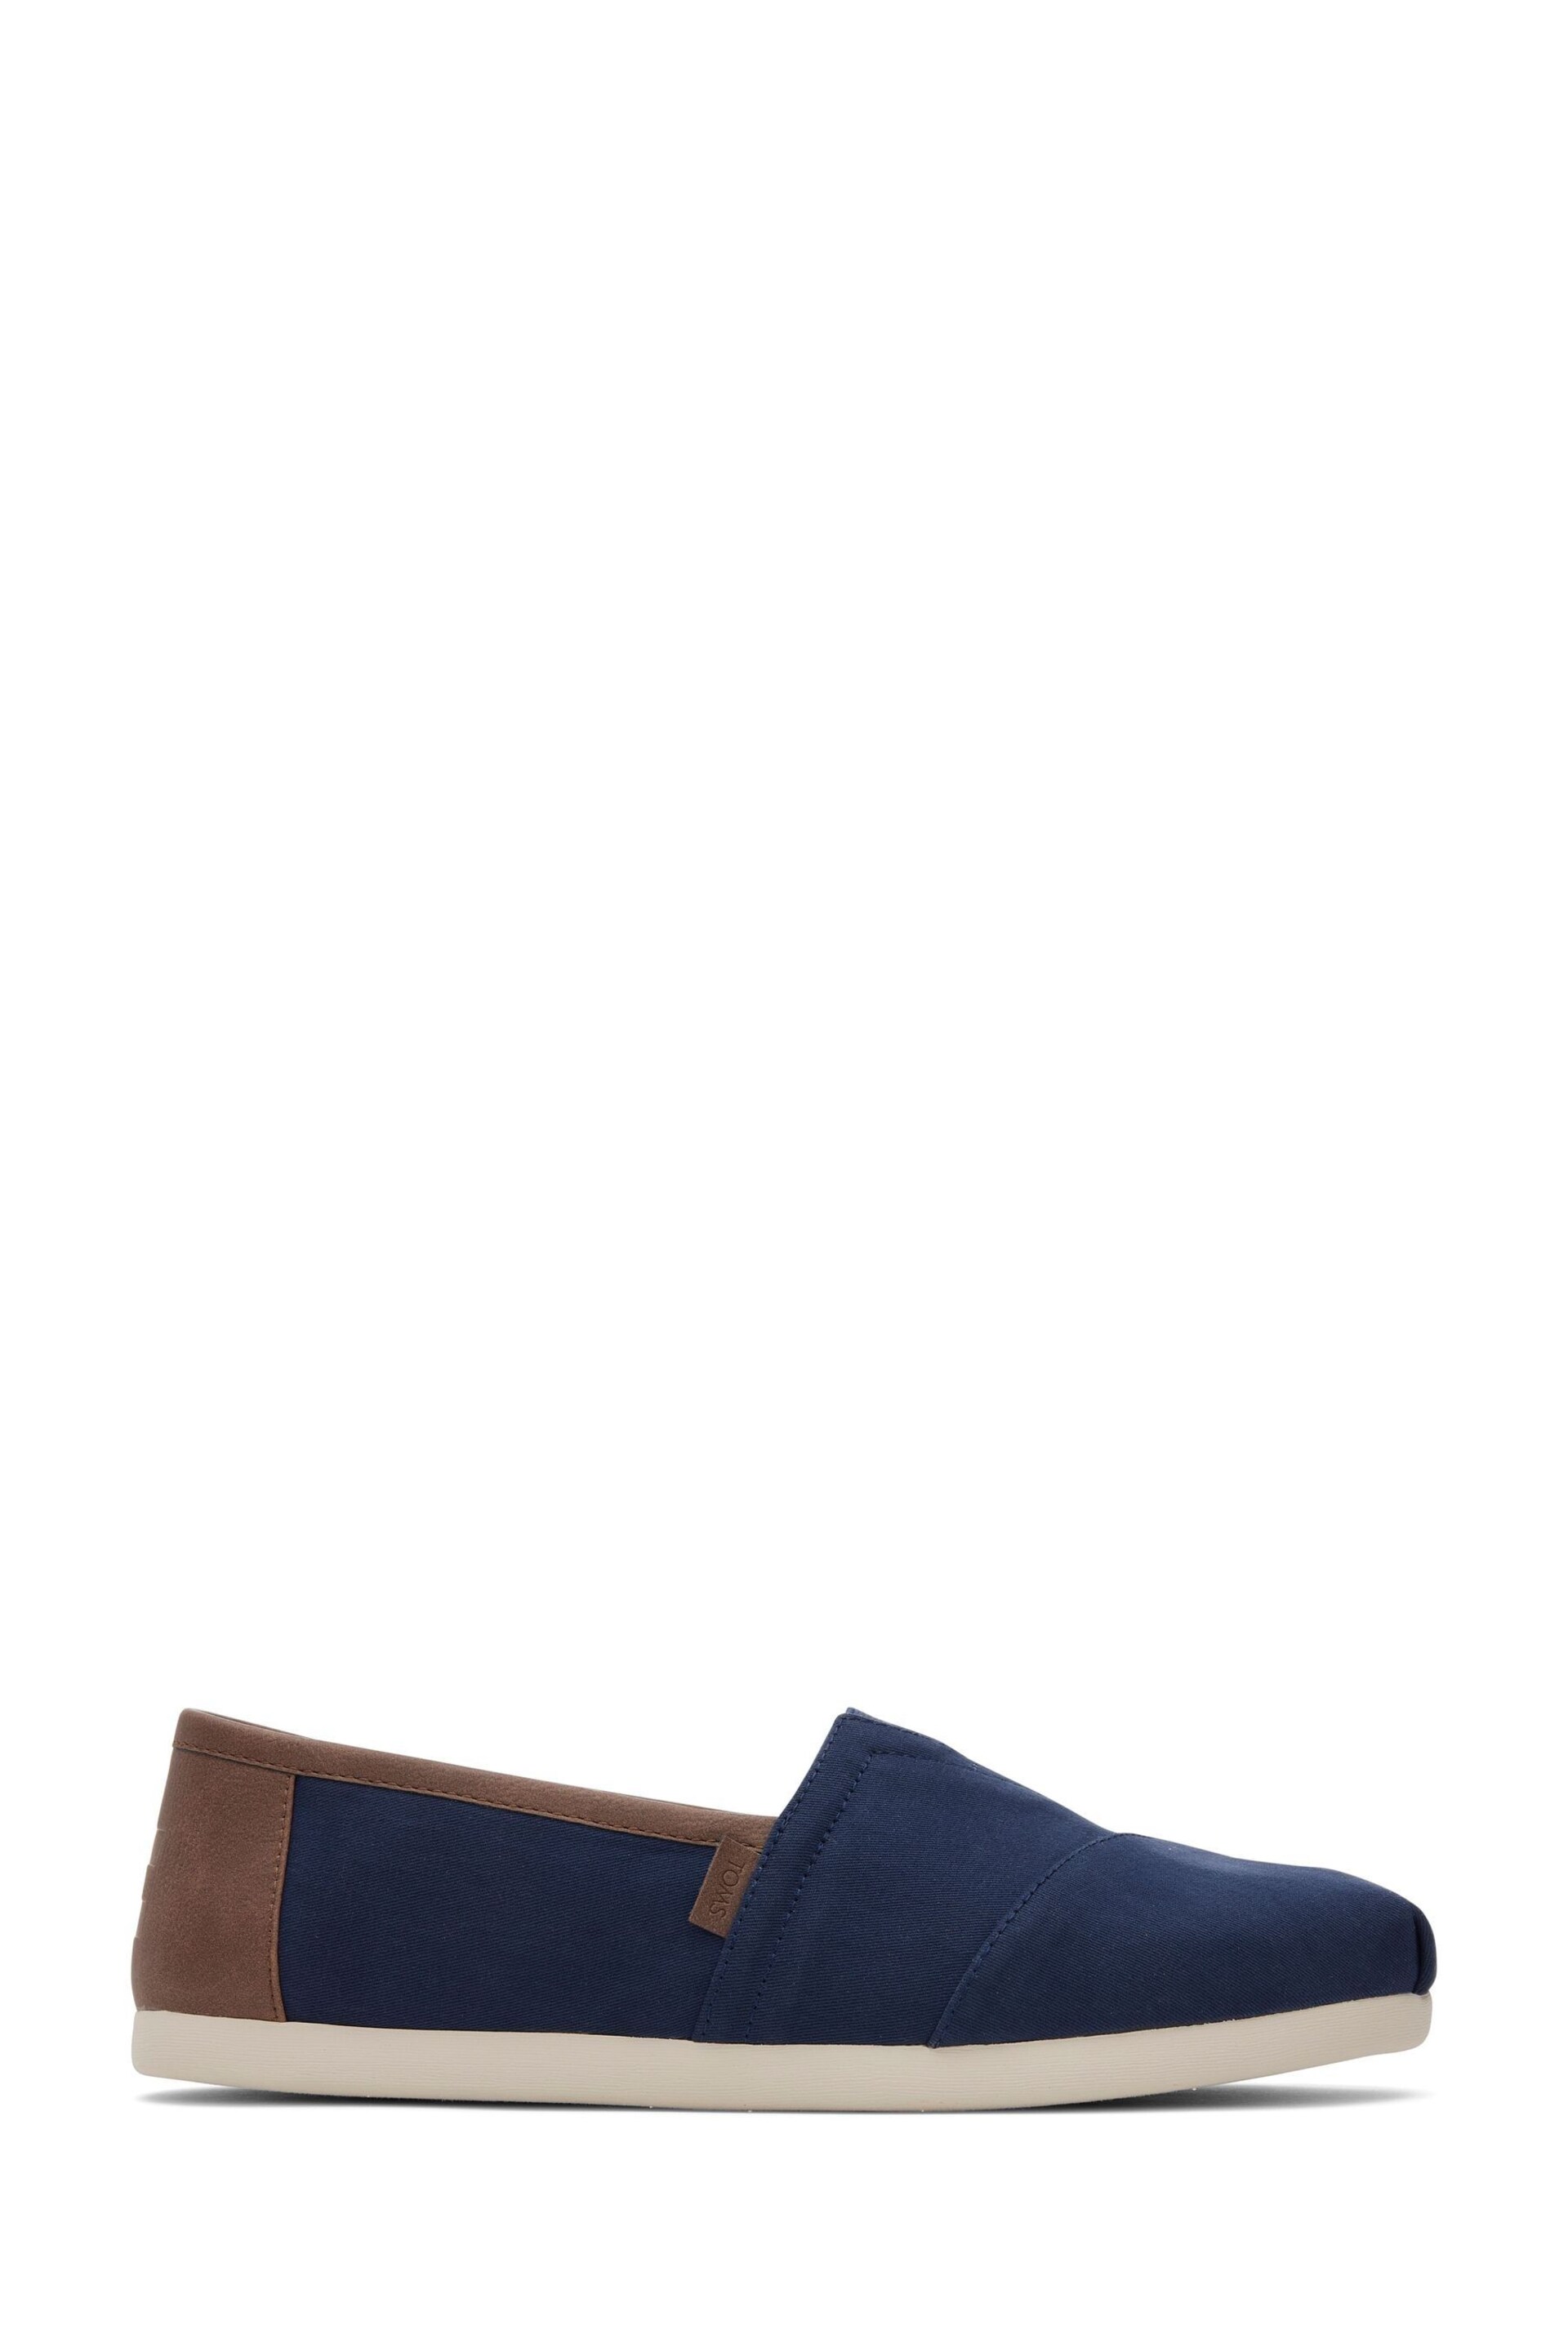 TOMS Vegan Alpargata Shoes in Navy Twill - Image 1 of 6